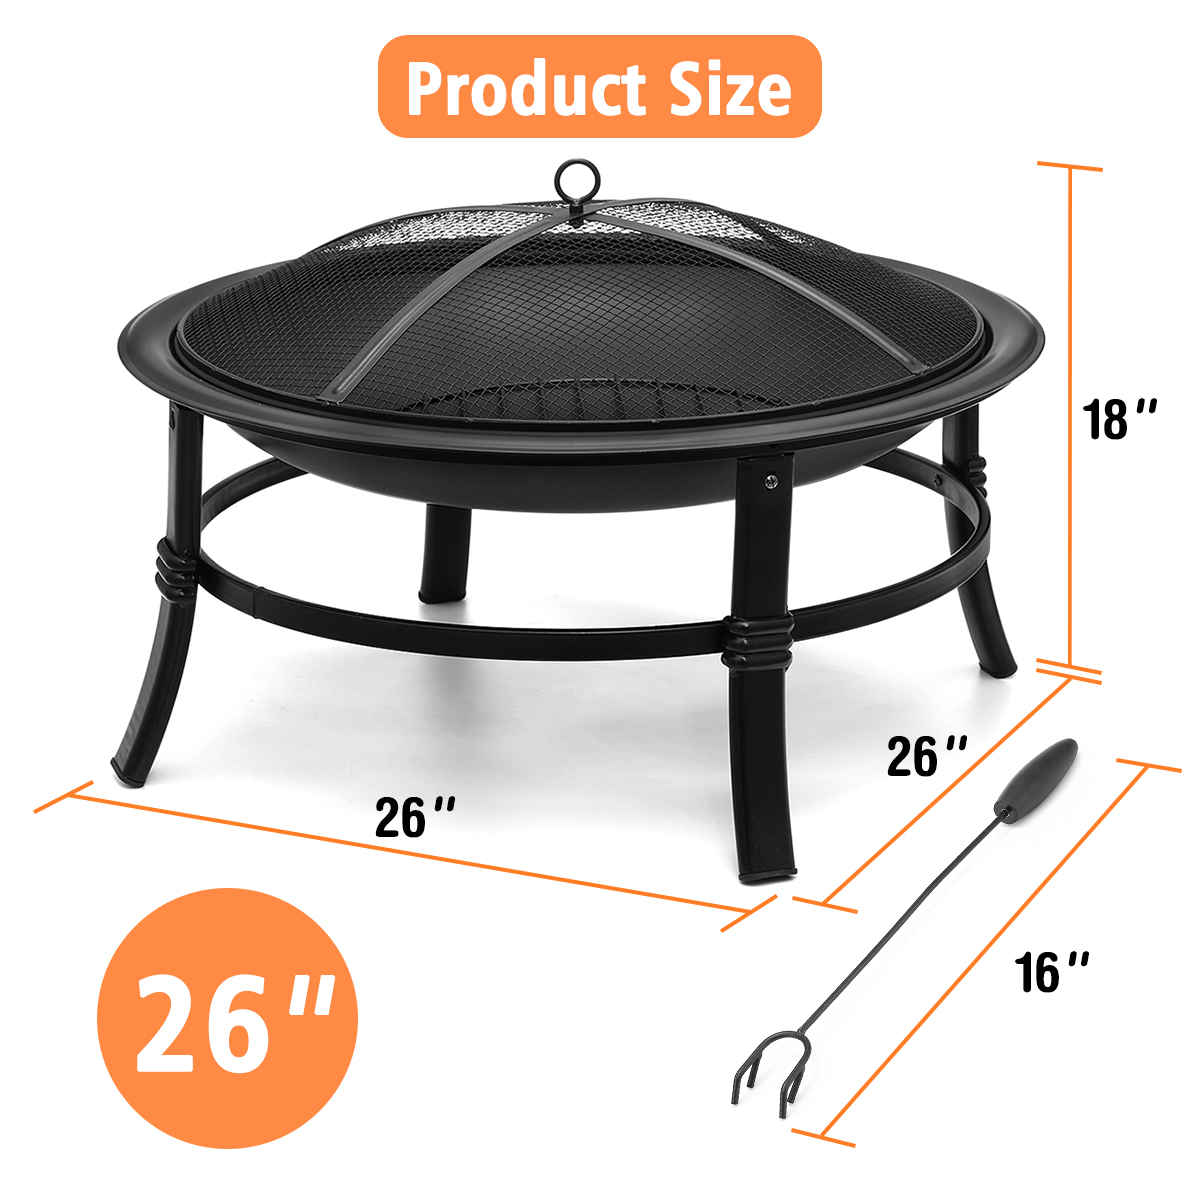 Kingso-26-inch-Fire-Pit-Wood-Burning--Small--Heavy-Duty-Steel-Firepit-with-Spark-Screen-Log-Grate-Po-1822387-9